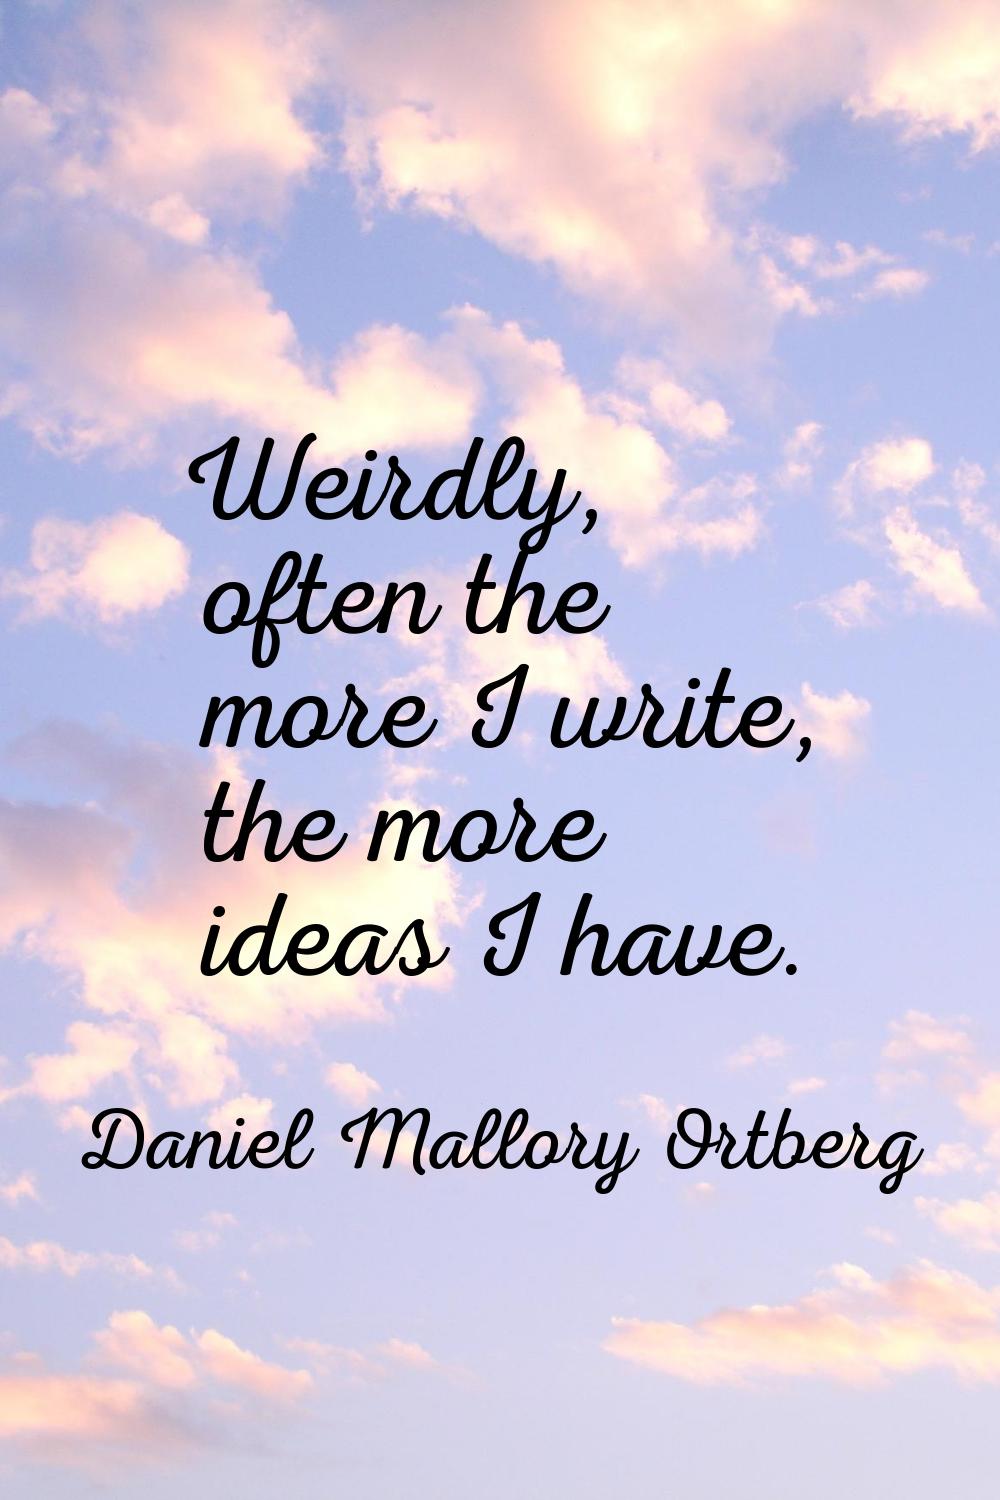 Weirdly, often the more I write, the more ideas I have.